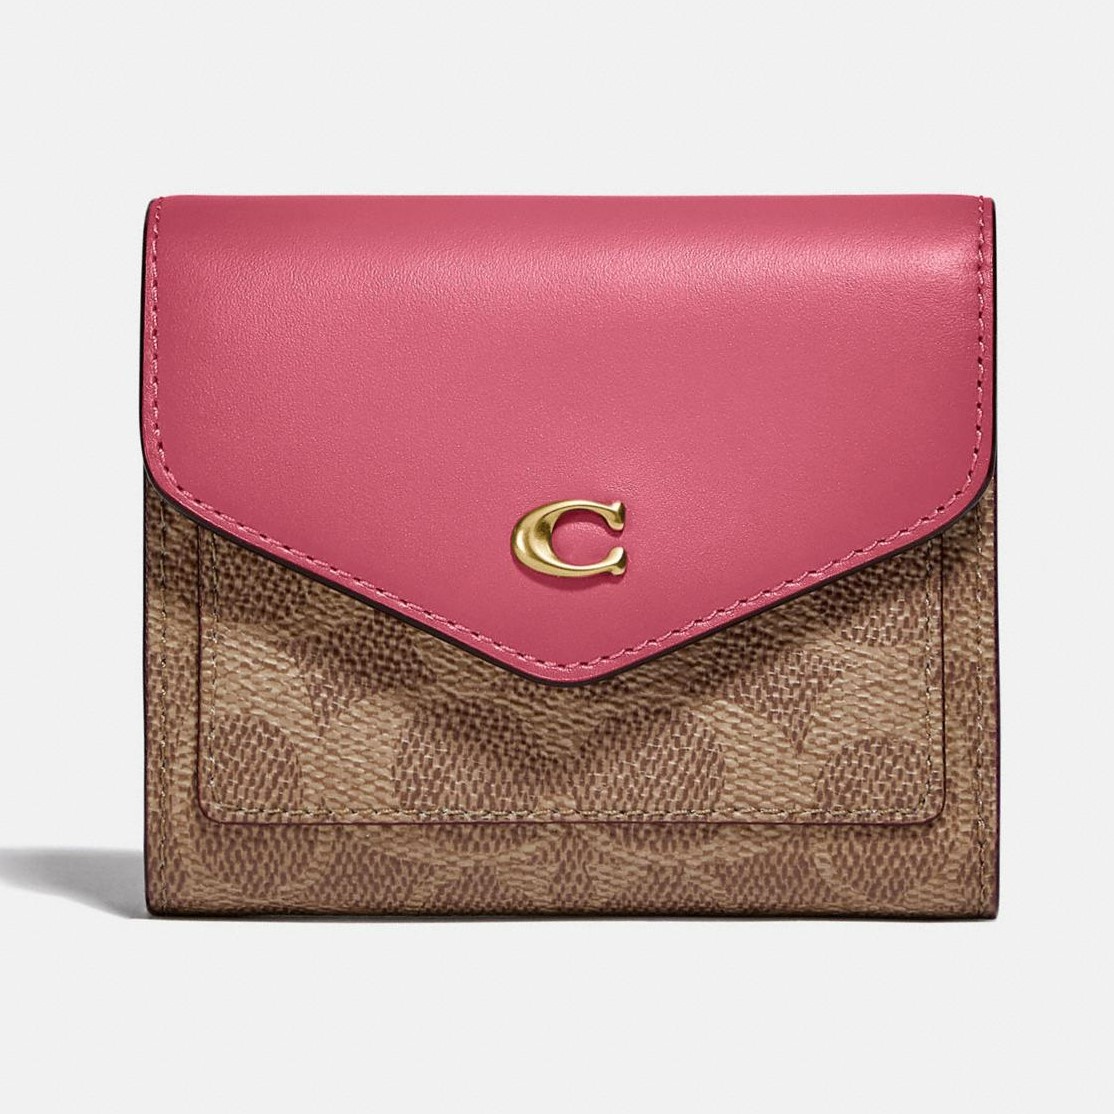 VÍ NGẮN NỮ GẬP COACH WYN SMALL WALLET IN COLORBLOCK SIGNATURE CANVAS 7